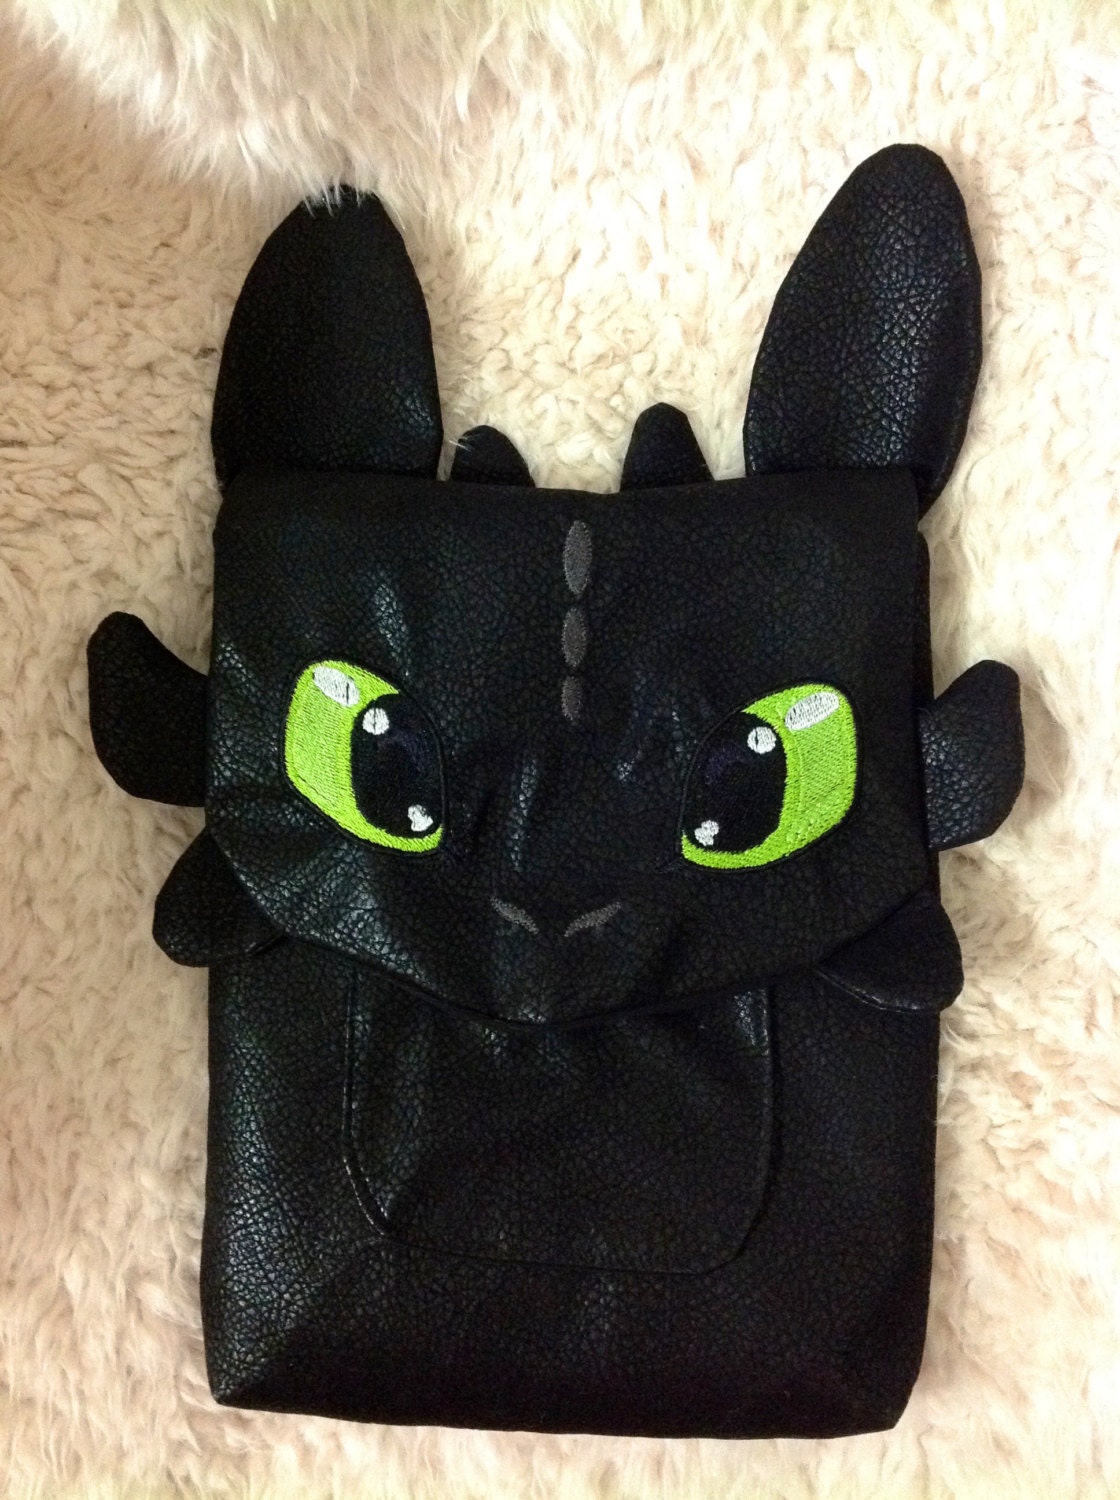 Toothless How to Train your Dragon Ipad cover or tablet case